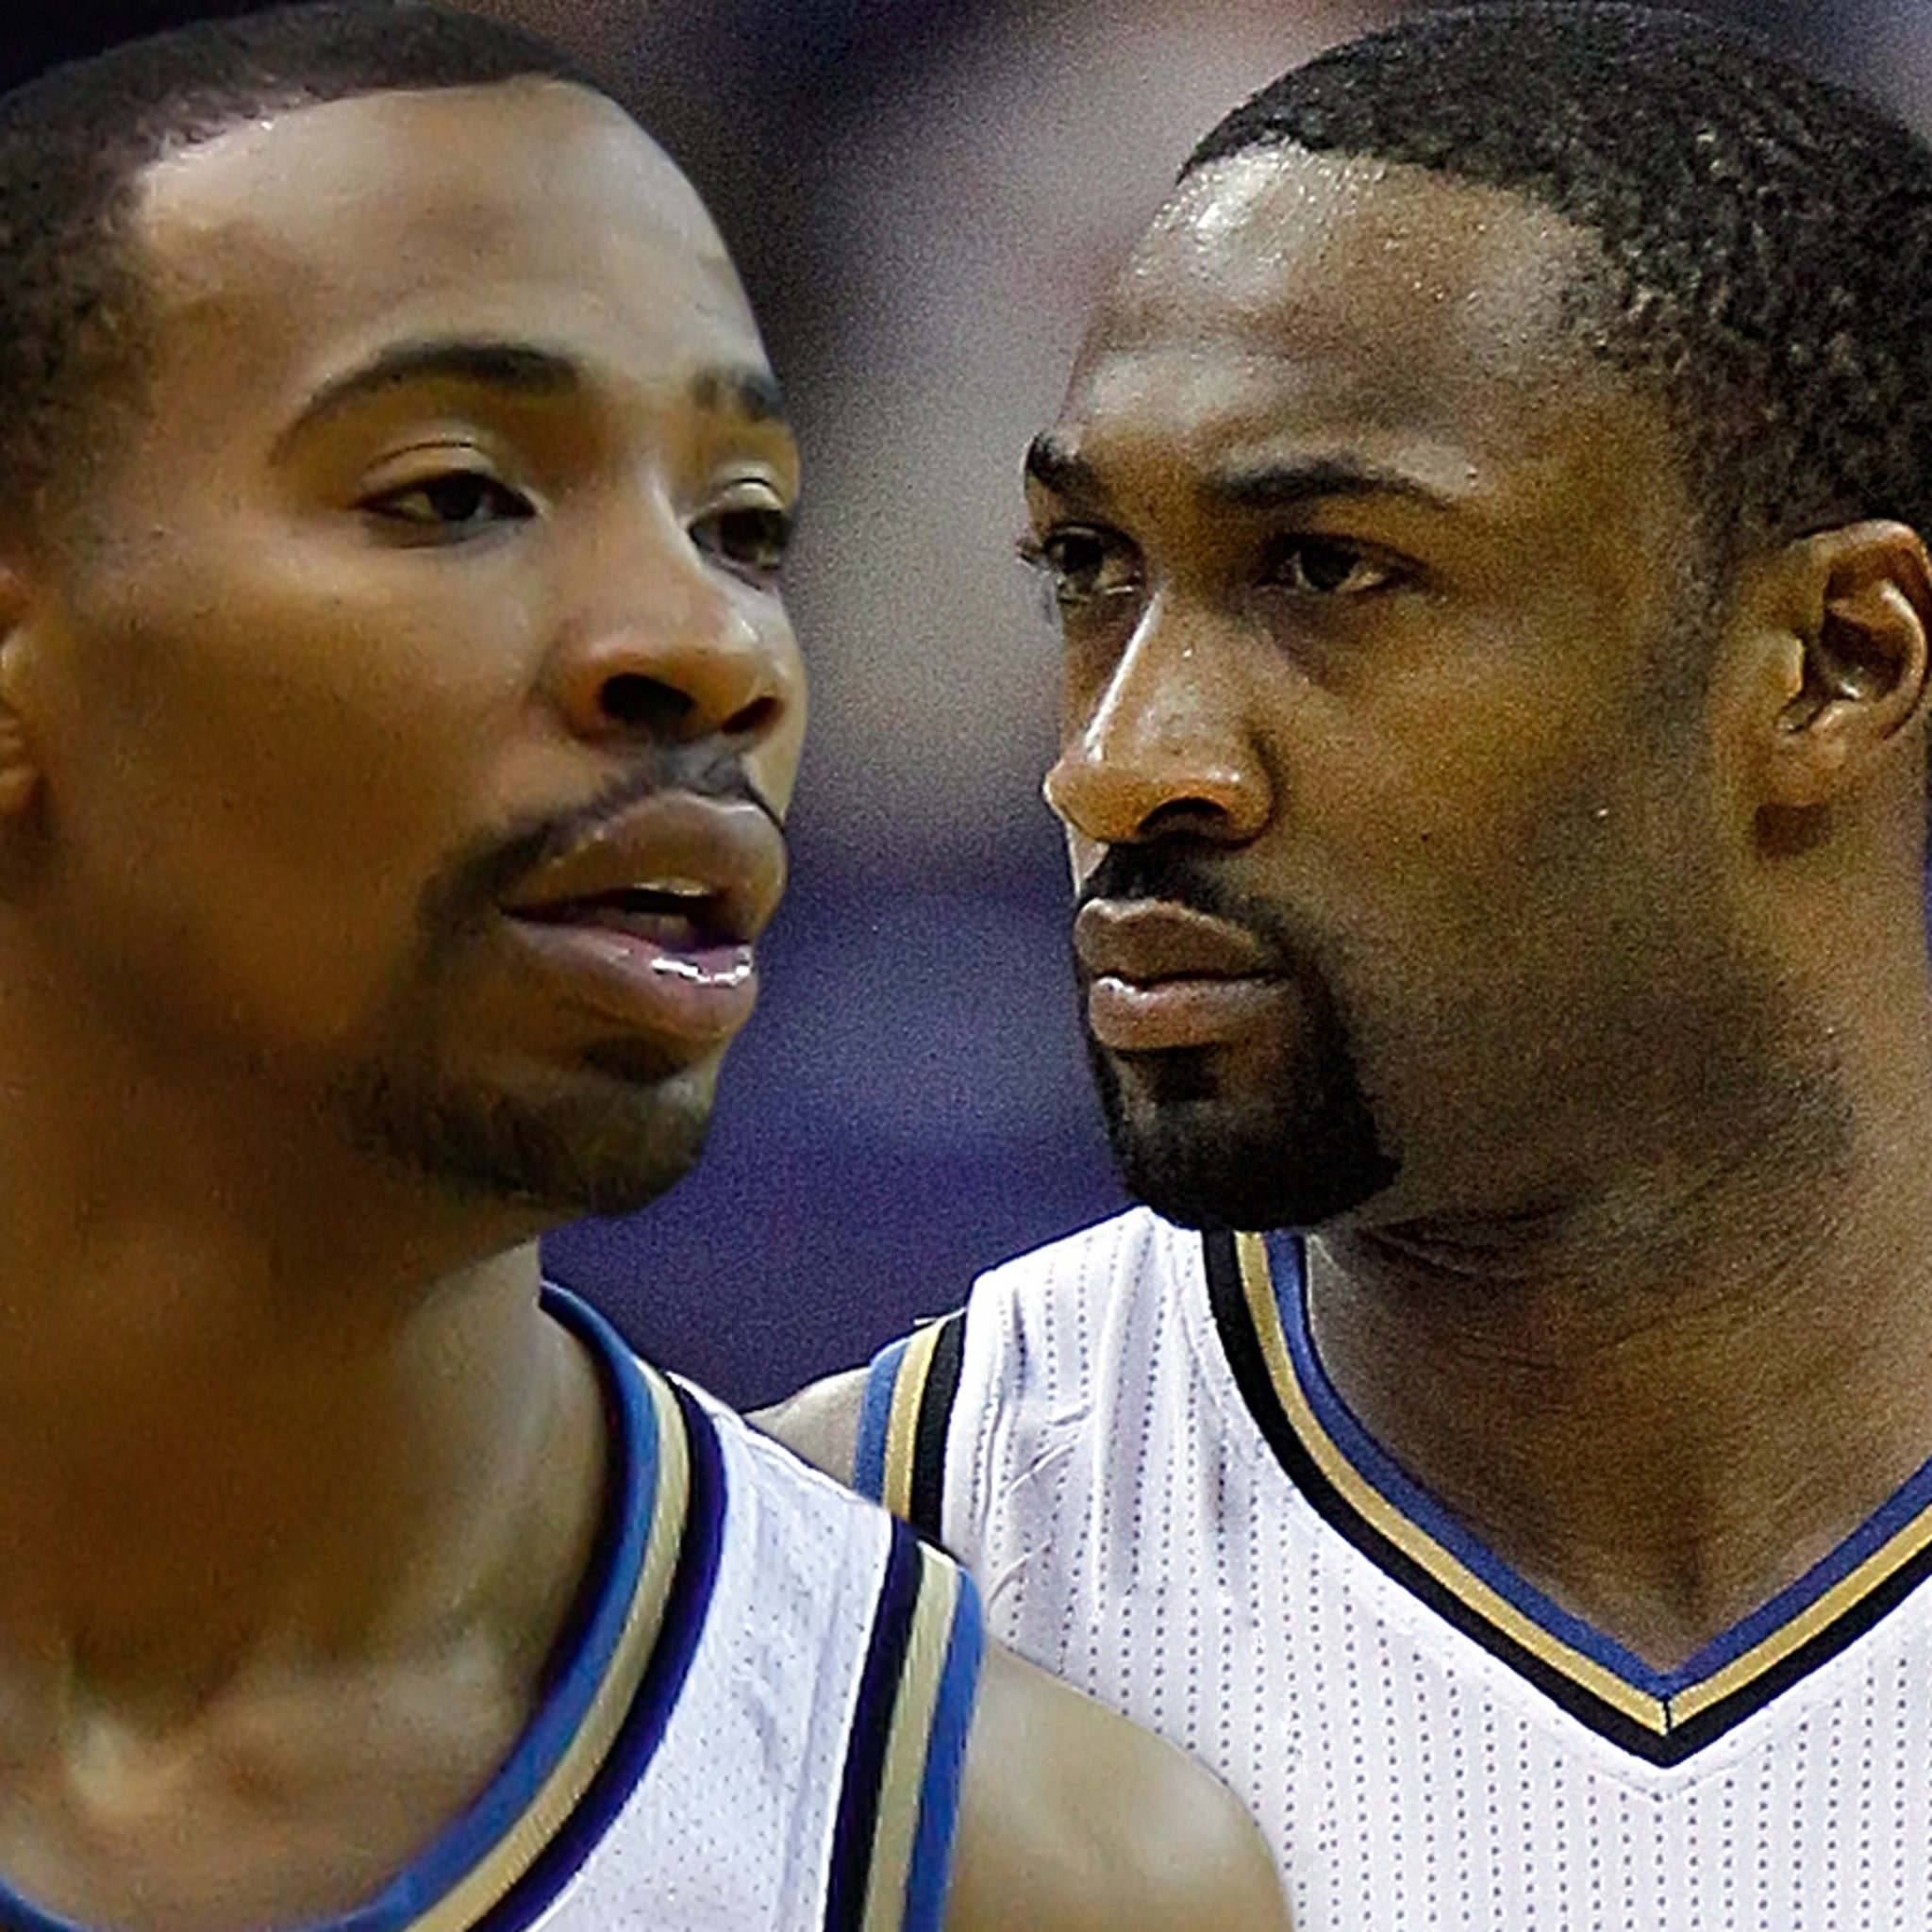 What Gilbert Arenas said to USA Basketball after he was cut from